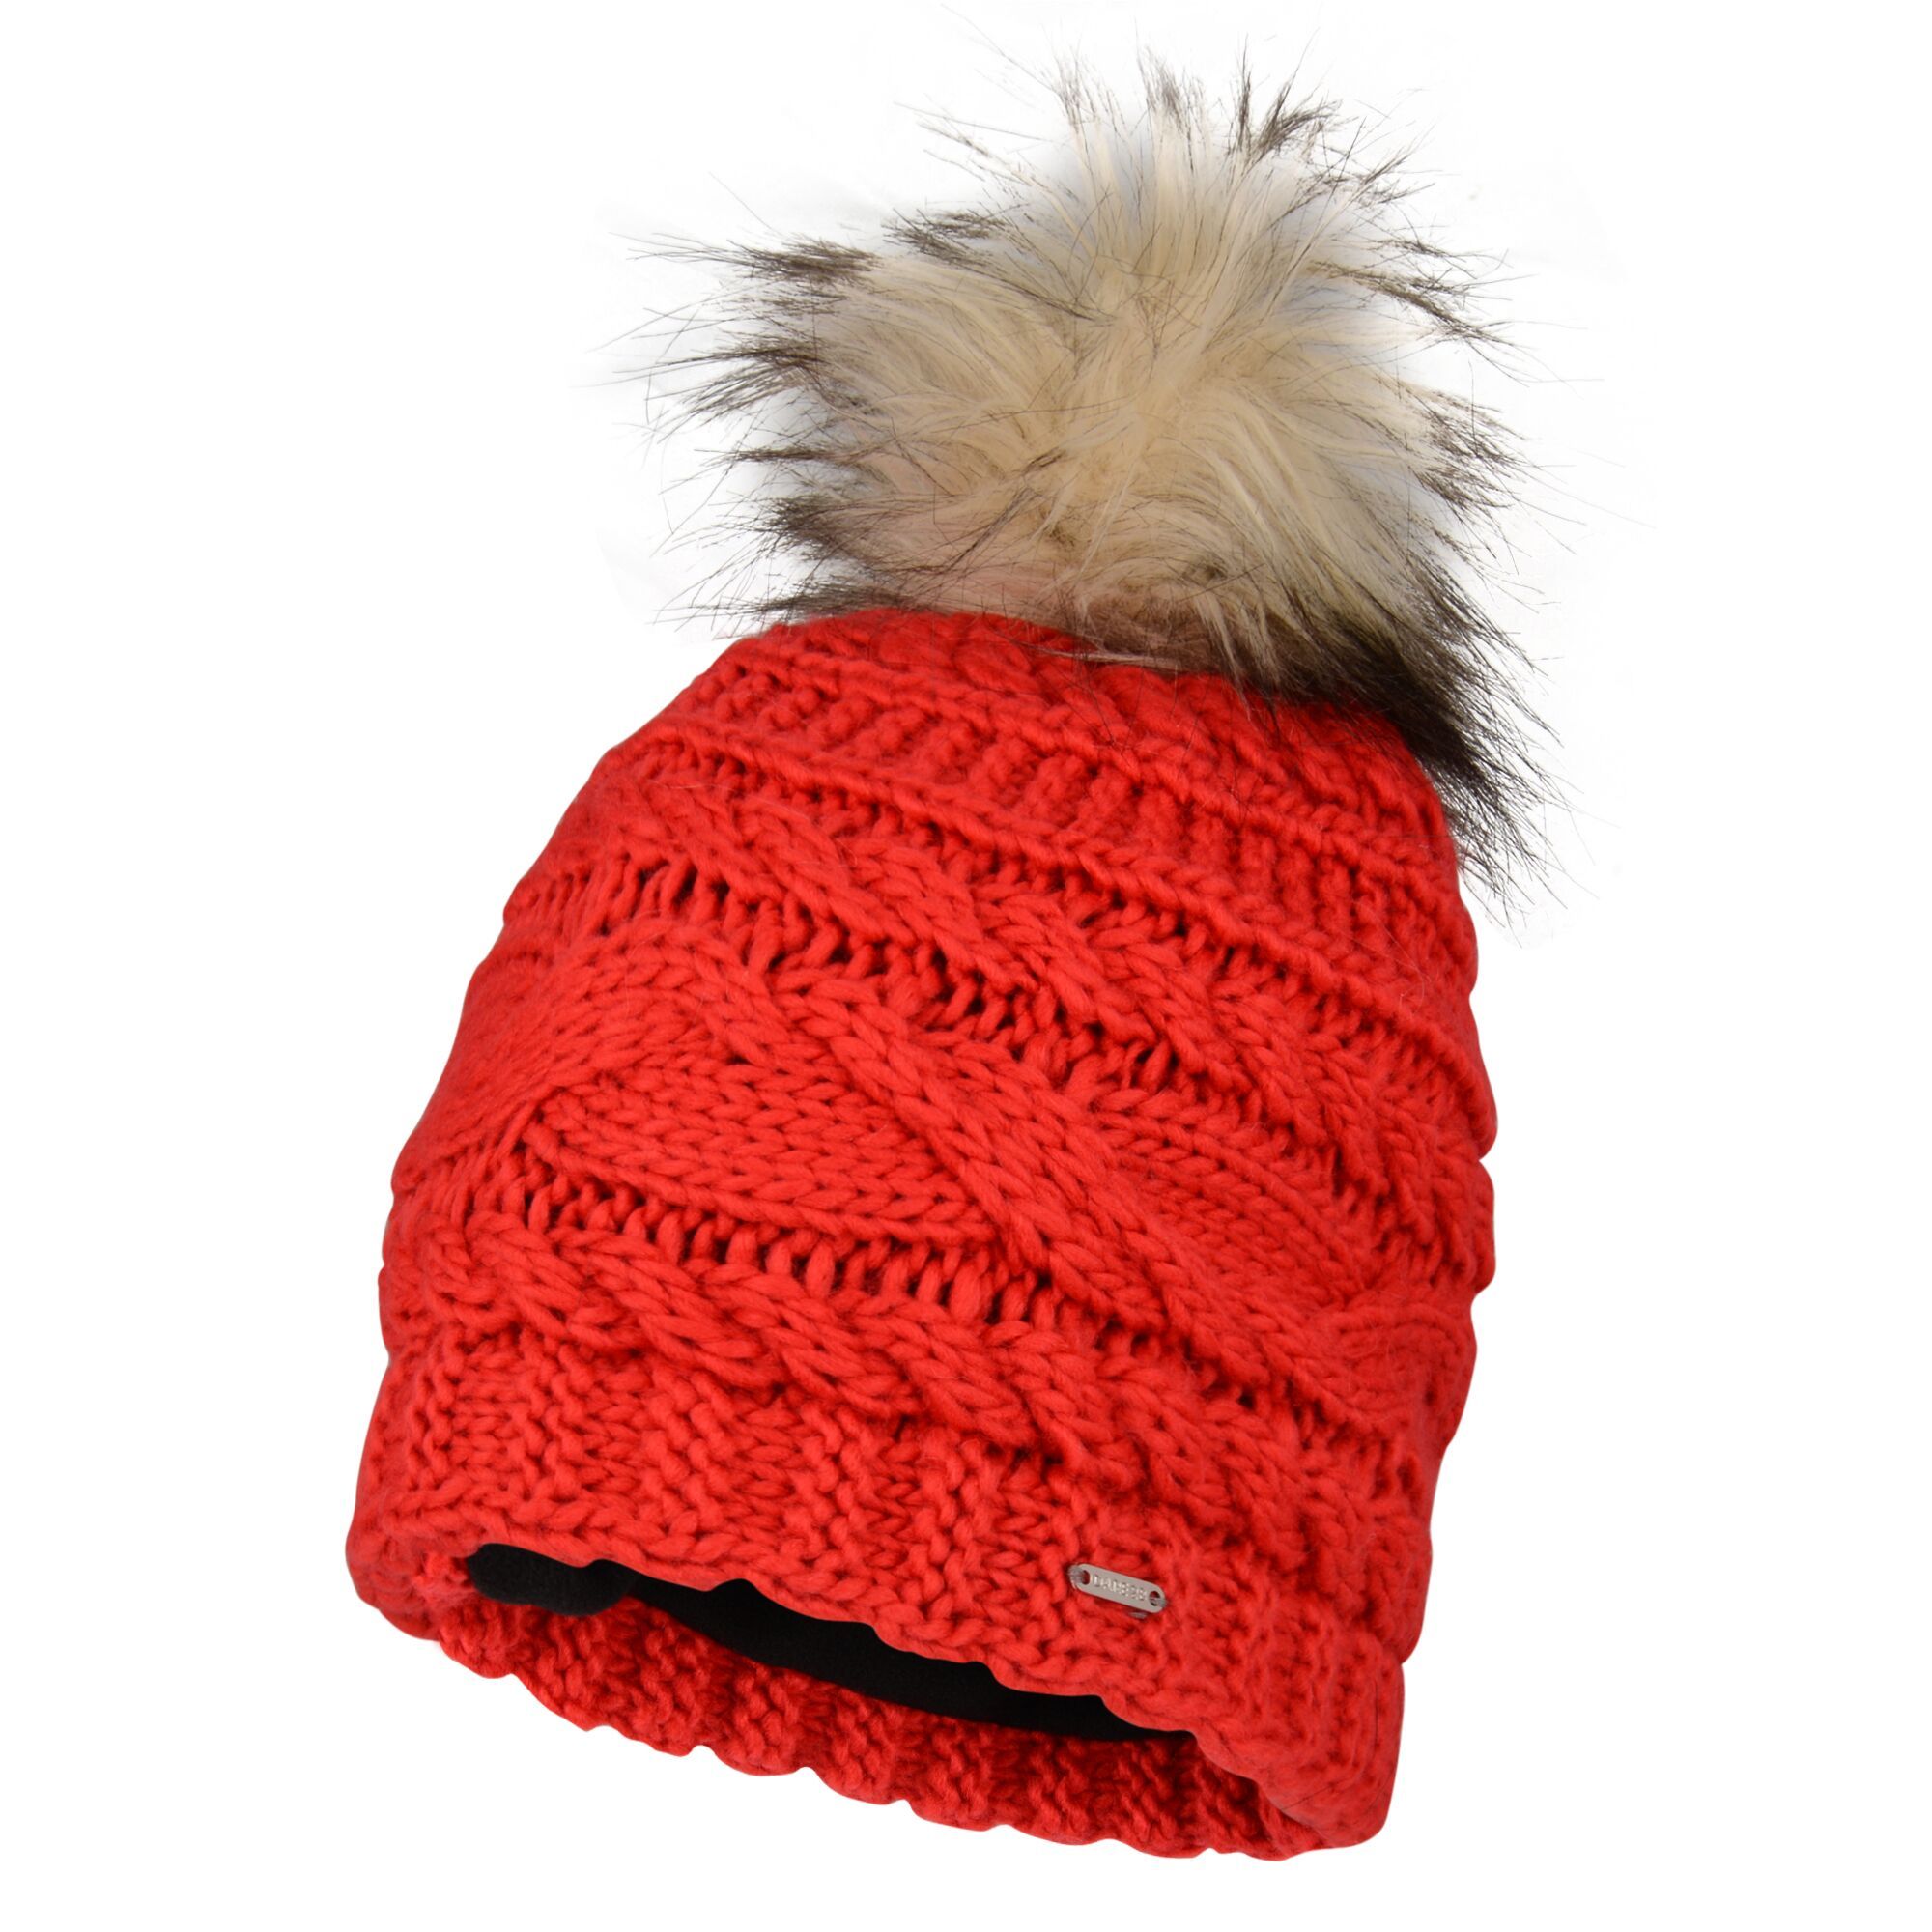 Material: acrylic: 100%. Soft knit construction. Fleece lining. Faux fur bobble. Knitted ribbed cuff.